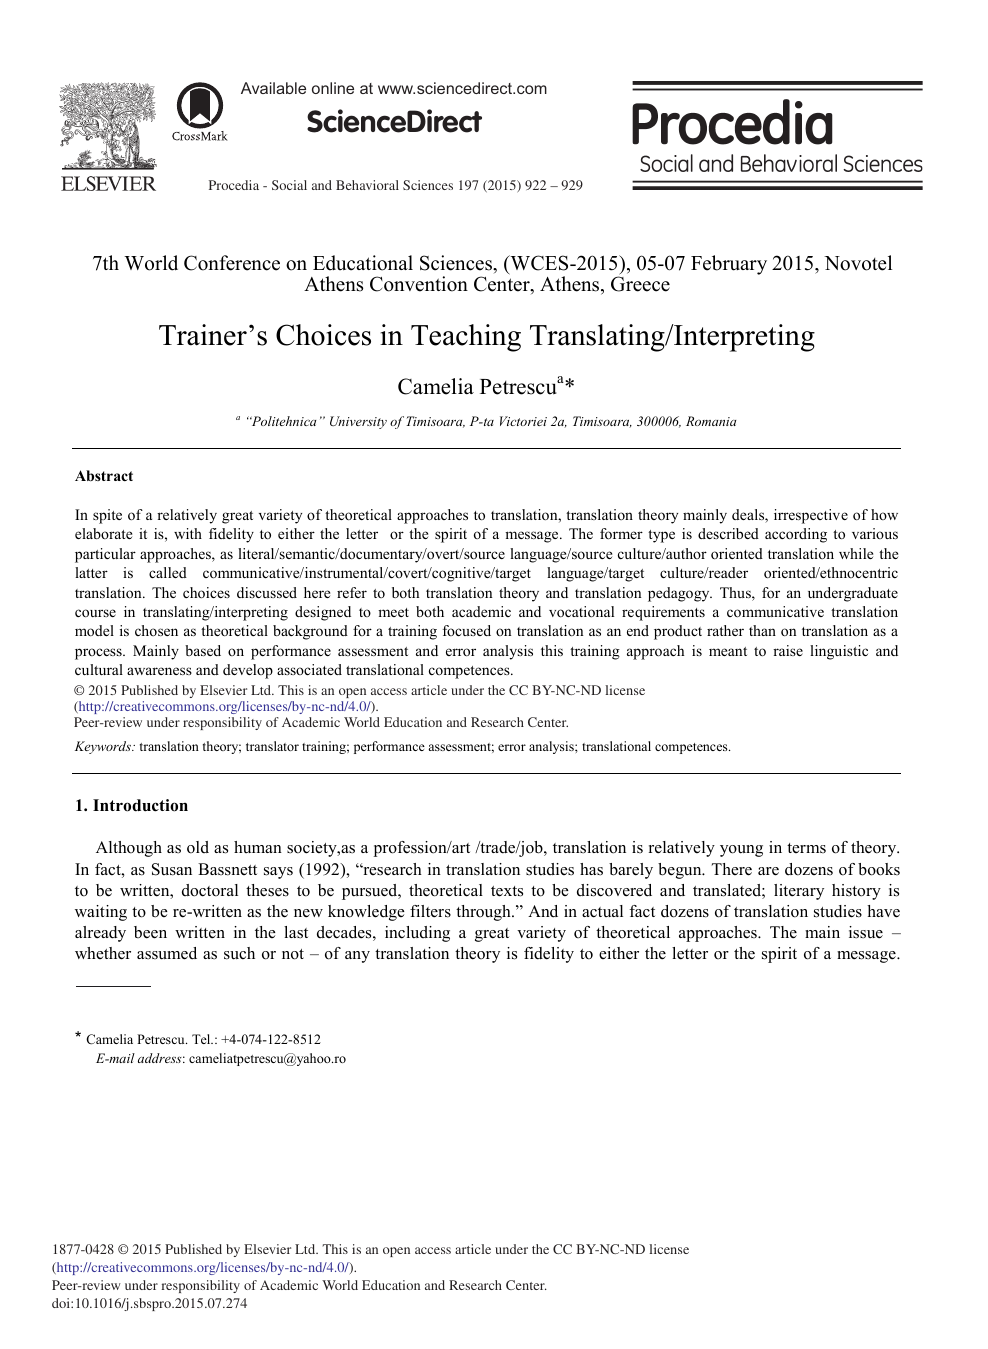 Trainer S Choices In Teaching Translating Interpreting Topic Of